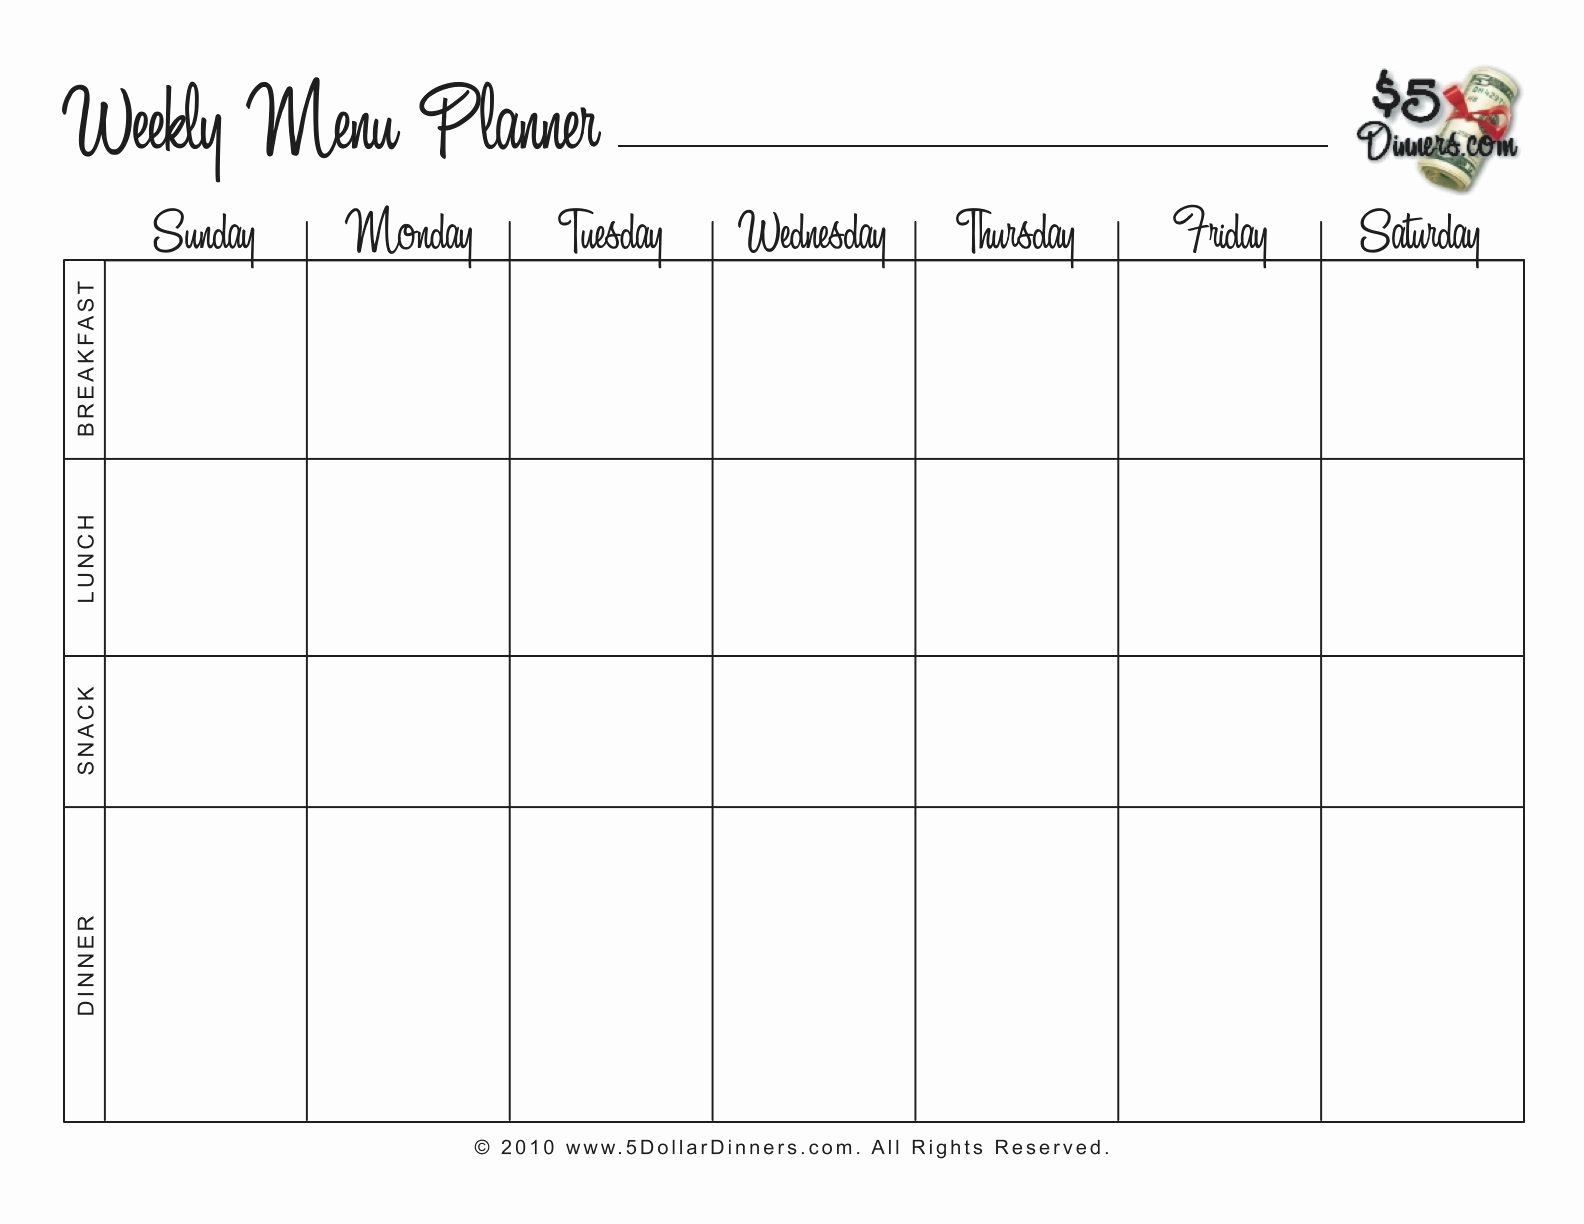 Monthly Meal Planner Template New Menu Plan Monday Sleeping In On Sunday Mornings